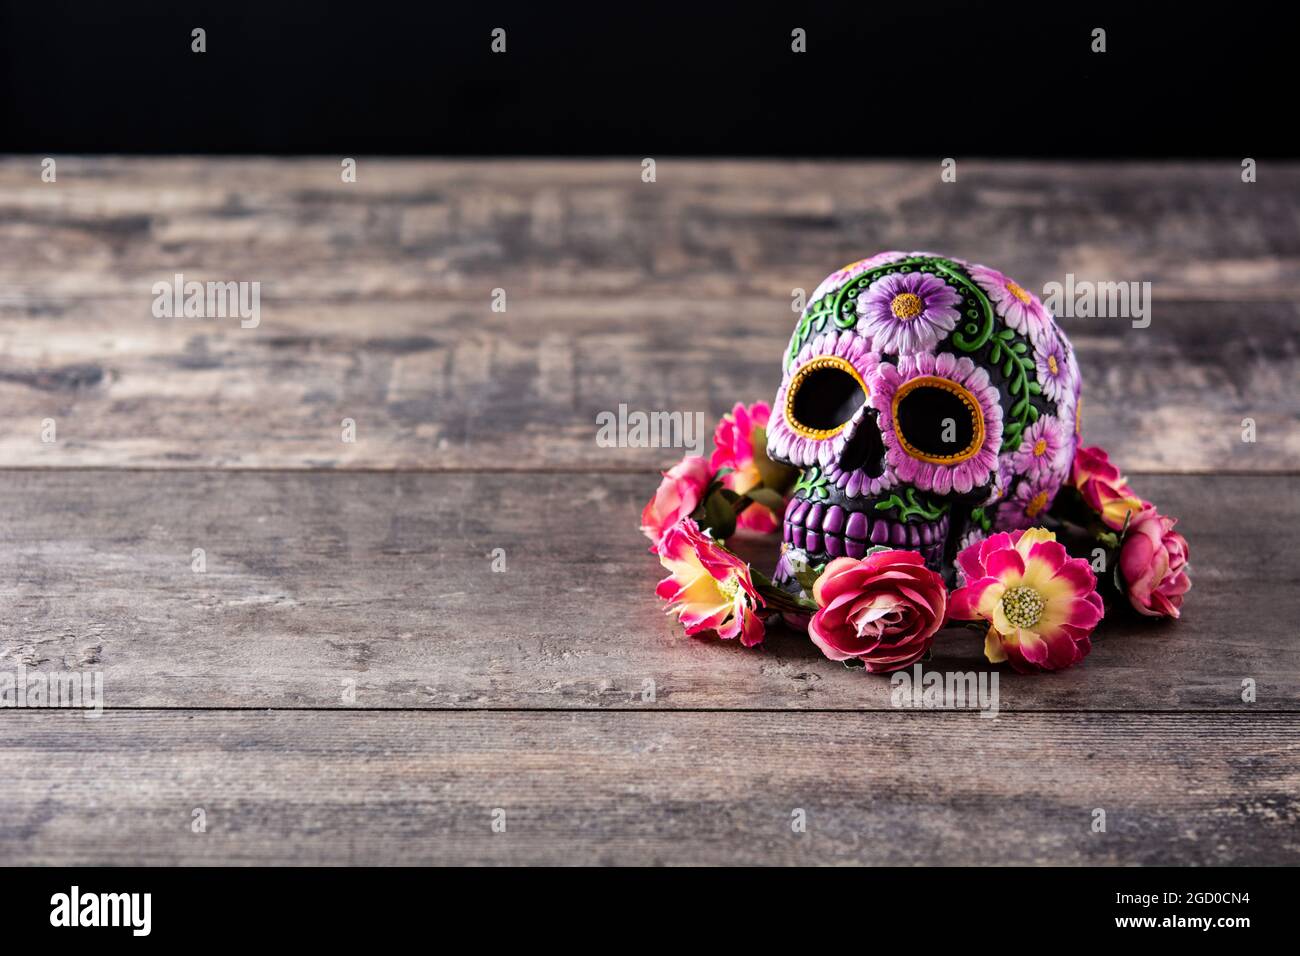 Typical Mexican skull and flowers diadem on wooden table. Dia de los muertos. Stock Photo